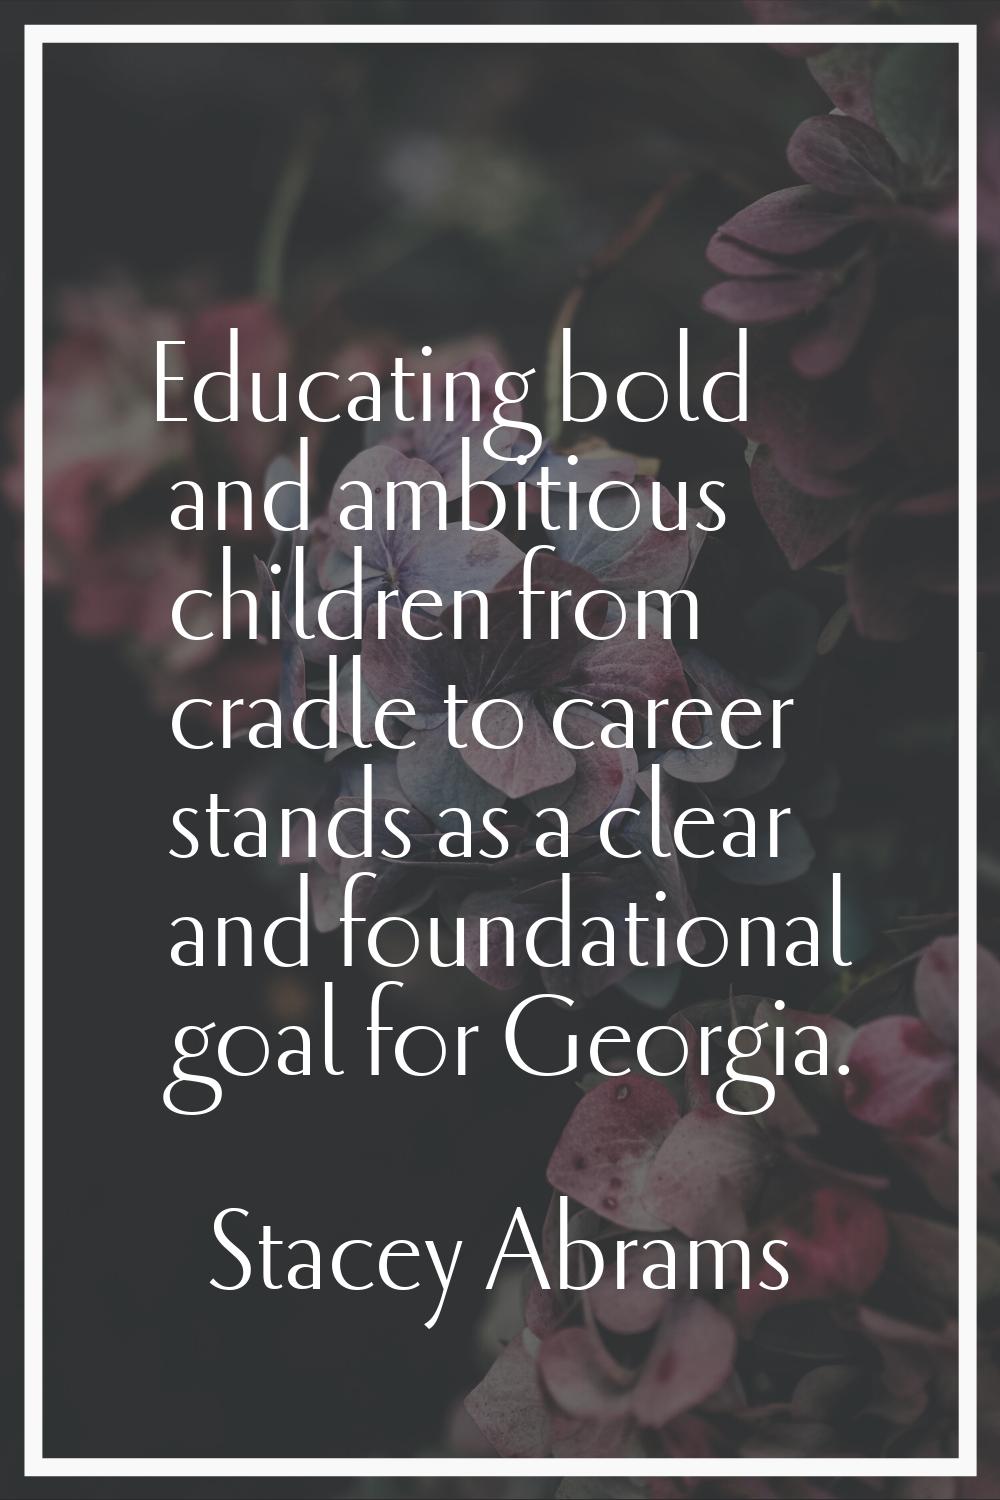 Educating bold and ambitious children from cradle to career stands as a clear and foundational goal